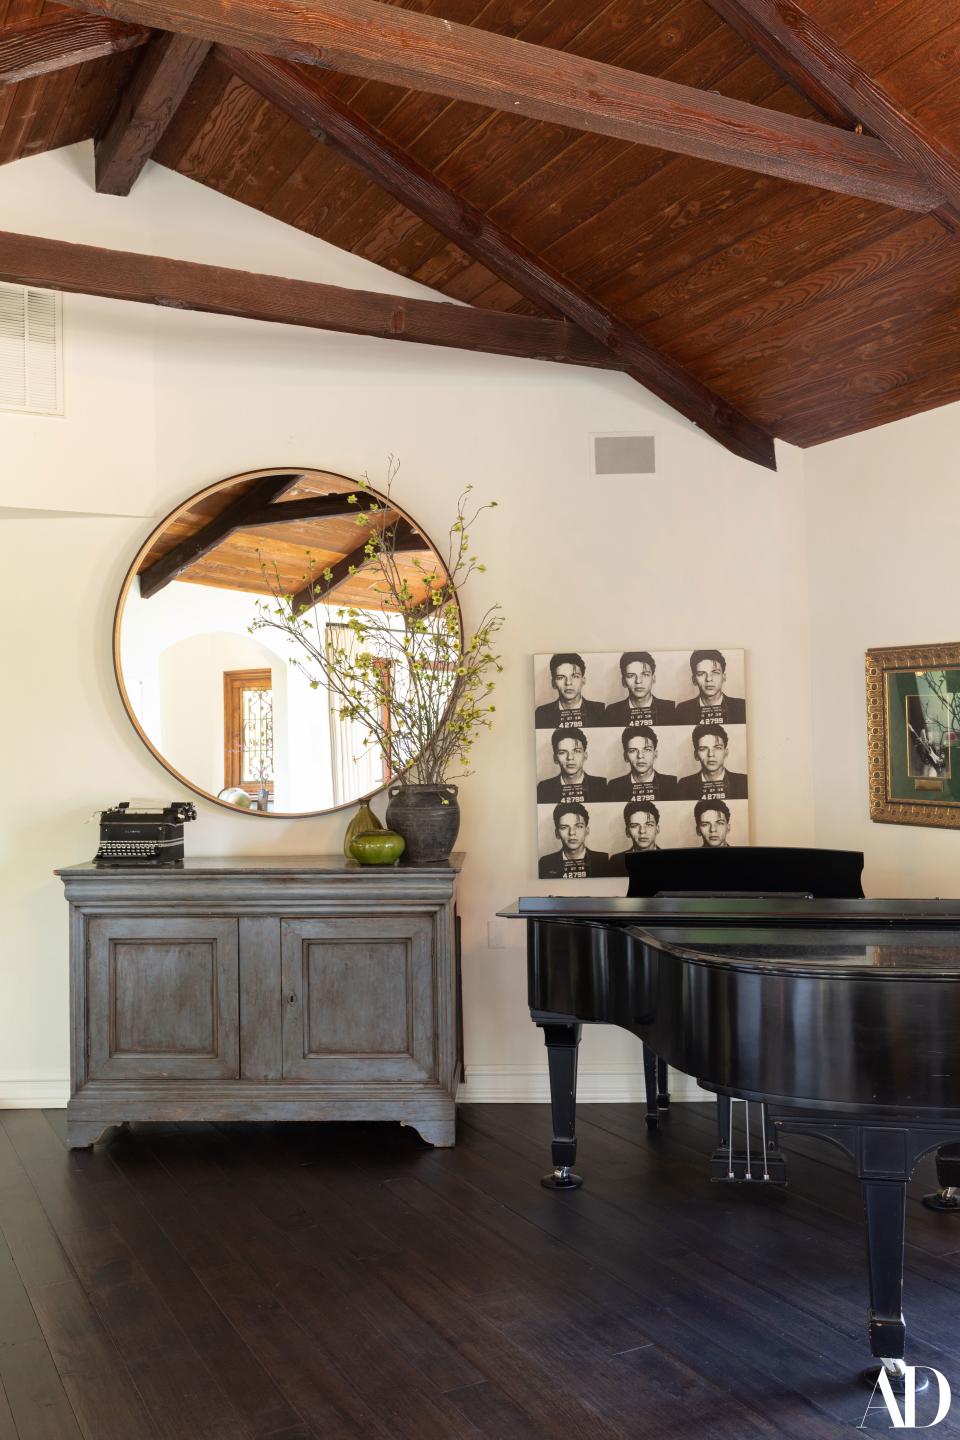 One of Stamos’s first purchases when he started his career was this Steinway & Sons piano from the 1940s. On the side table, there’s an old typewriter that was gifted to him from Tom Hanks.